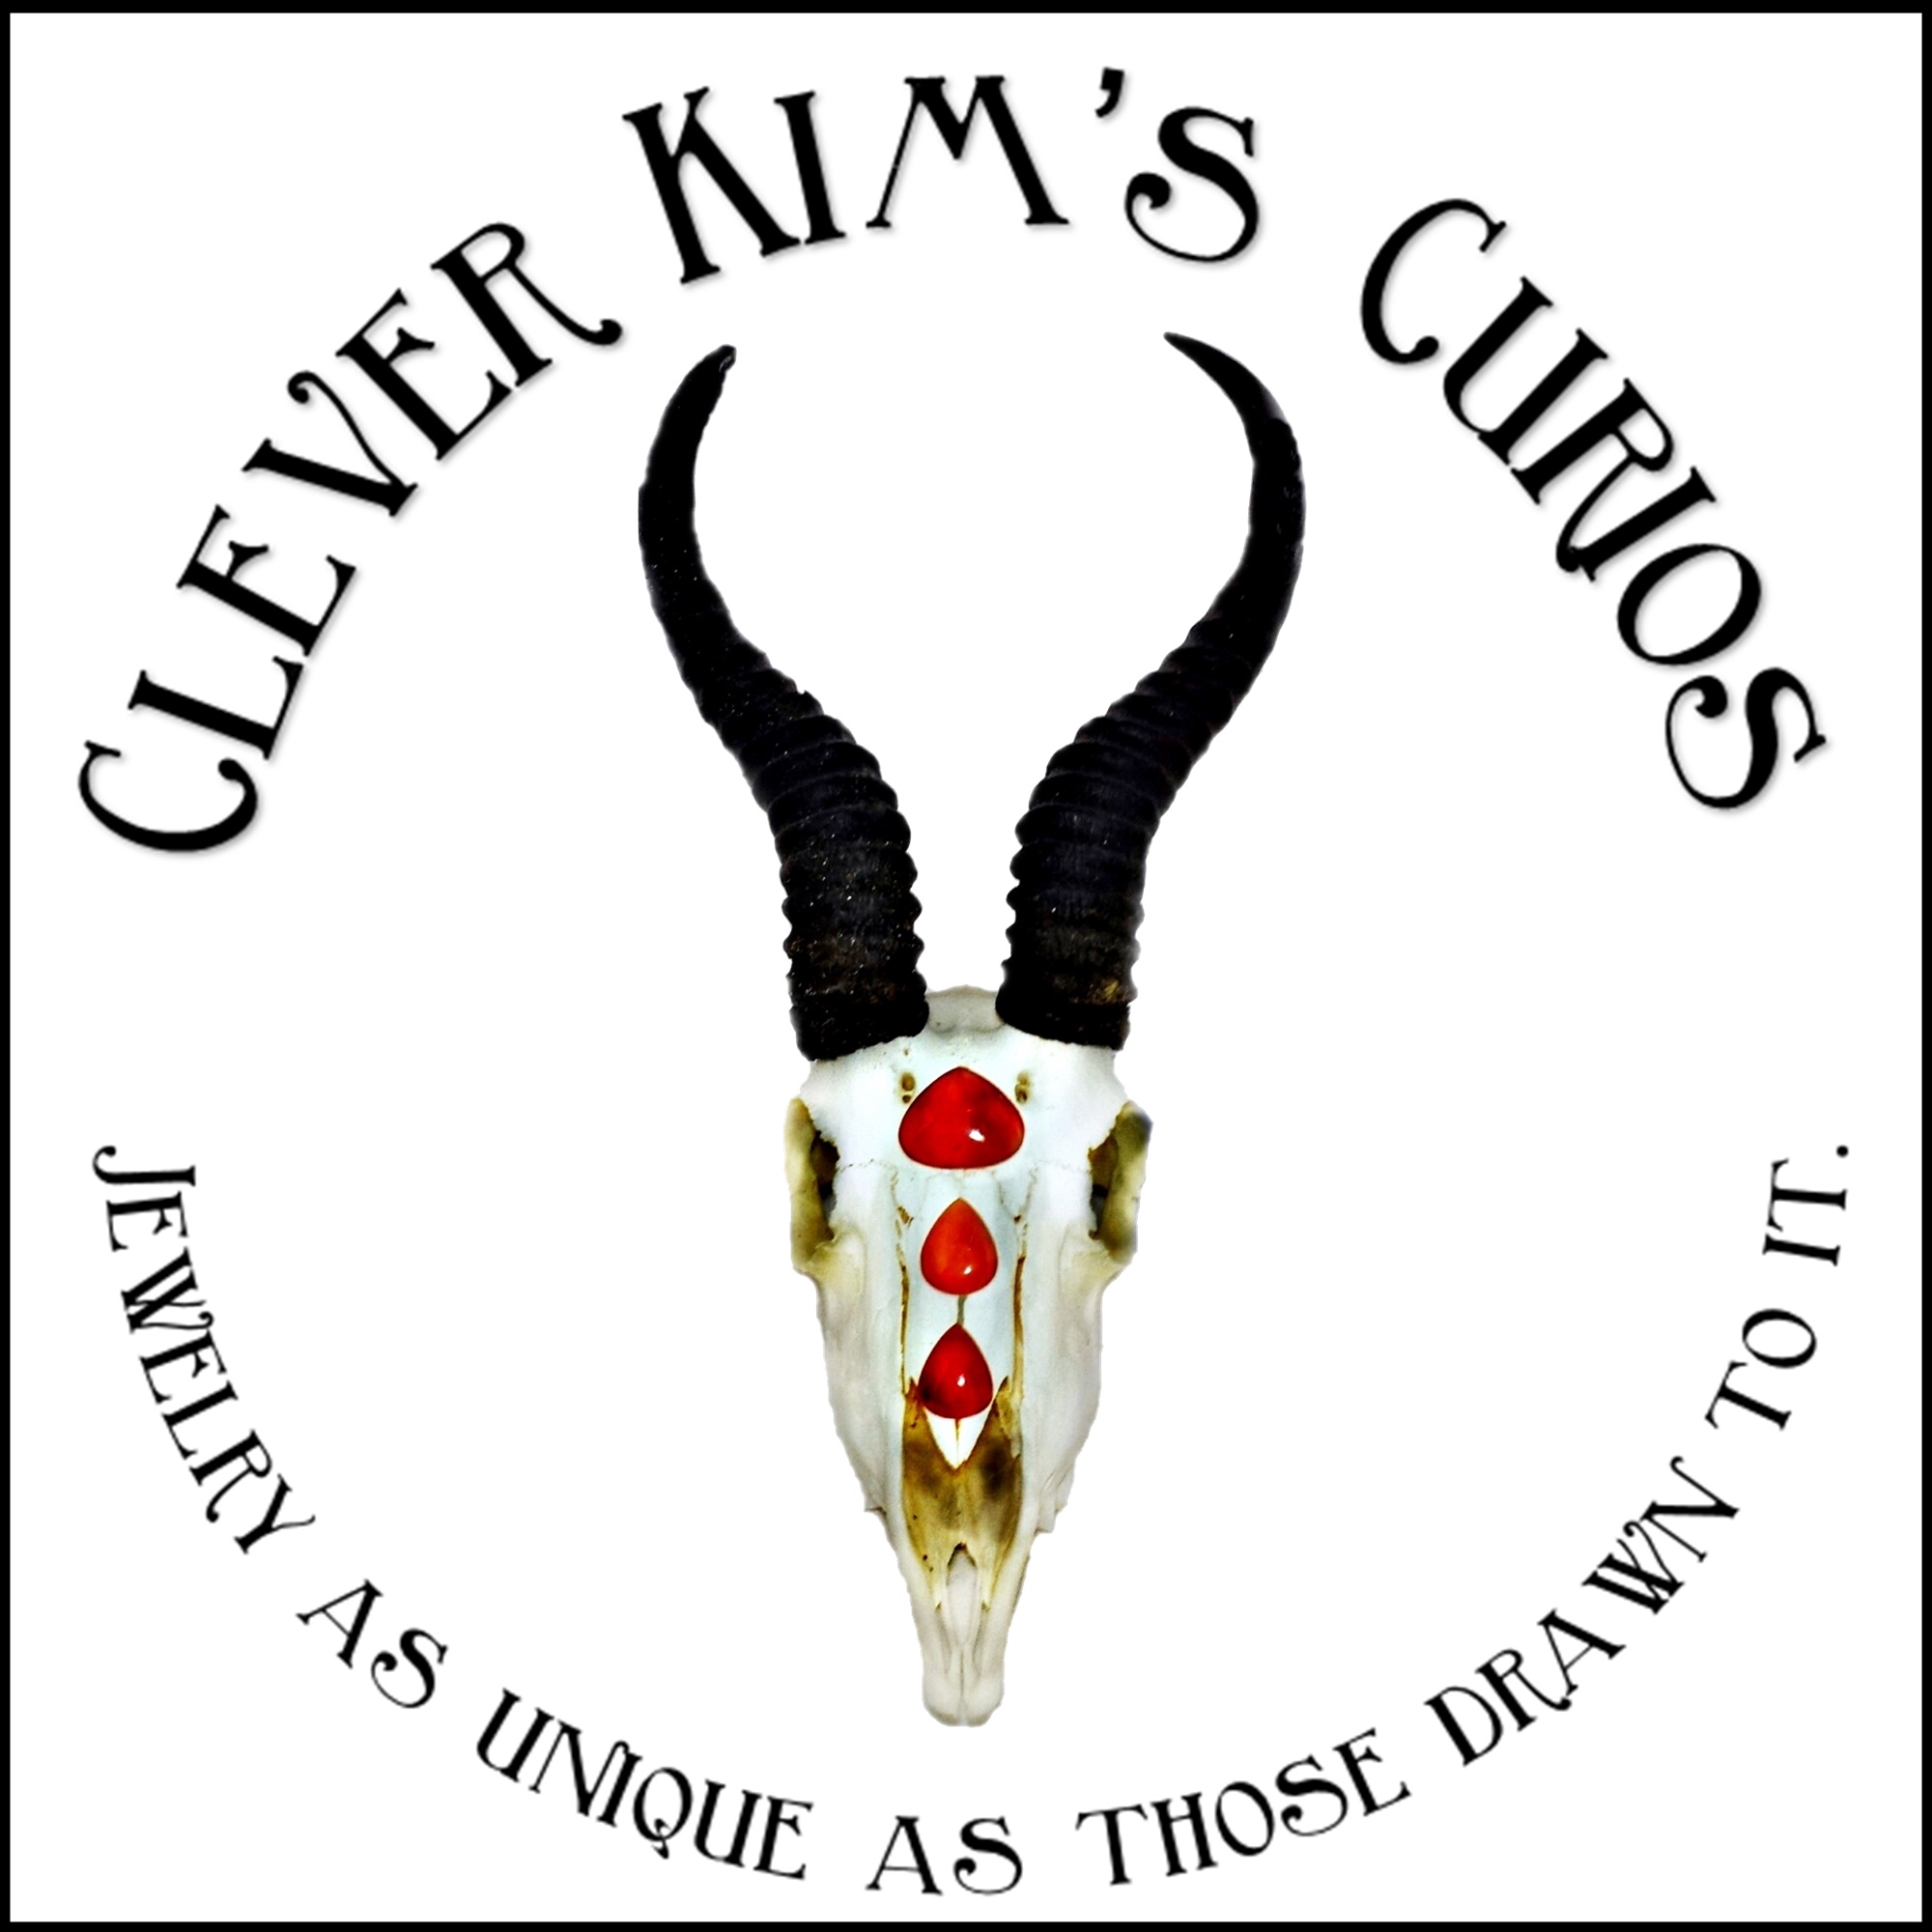 clever kim's curios jewelry as unique as those drawn to it